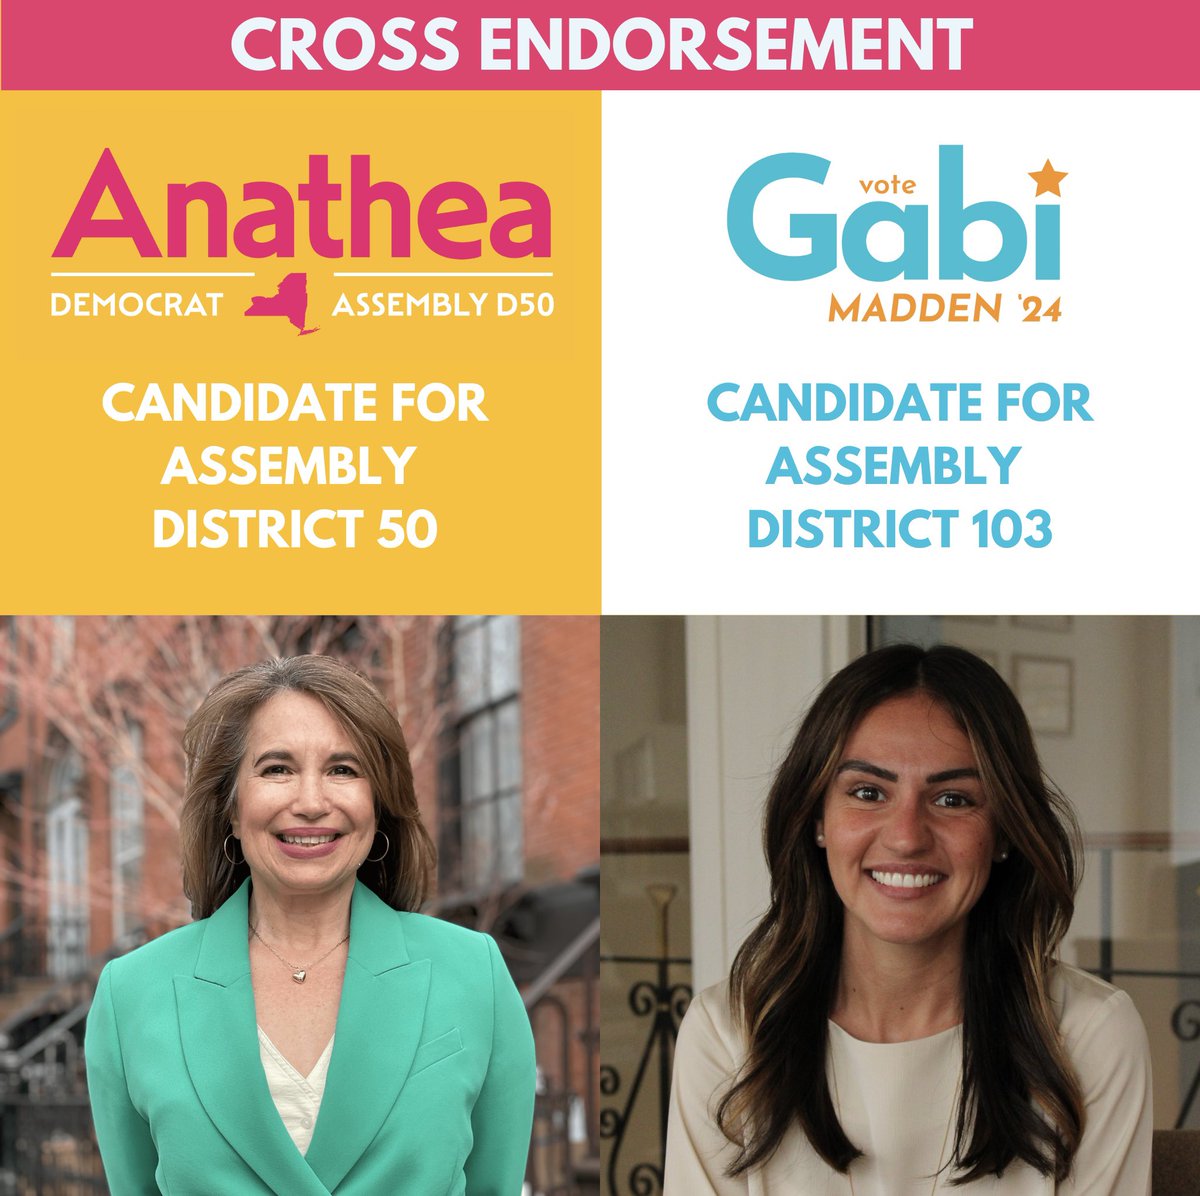 I am excited to cross-endorse Gabi Madden, and would be honored to work with her in the Assembly to bring the priorities of working people to the forefront. We need real champions who will show up and do the work, and I know she and I will deliver for our communities and New York